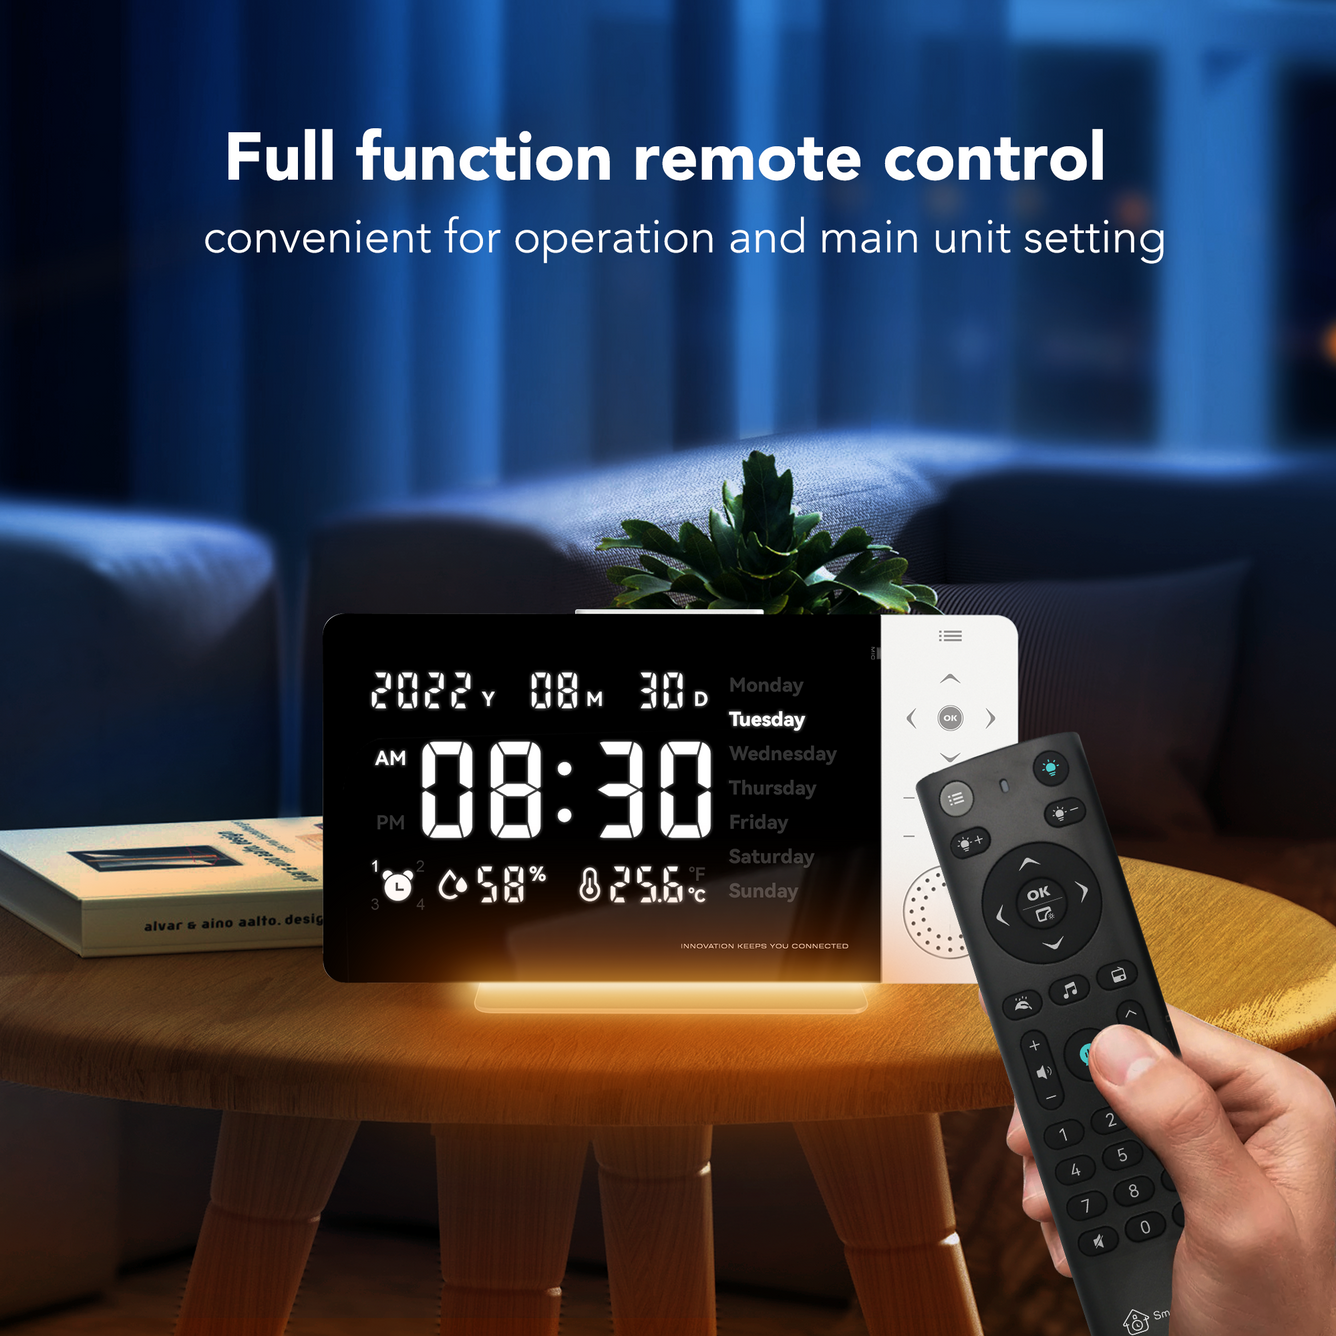 SMARTCUCKOO Smart Alarm Clock - 8-inch Large Display clear Day of the Week reading Night Light White Noise Temperature-humidity Sensor Personal Voice Medication Reminder. iOS/Android App, remote and  Bluetooth connection!